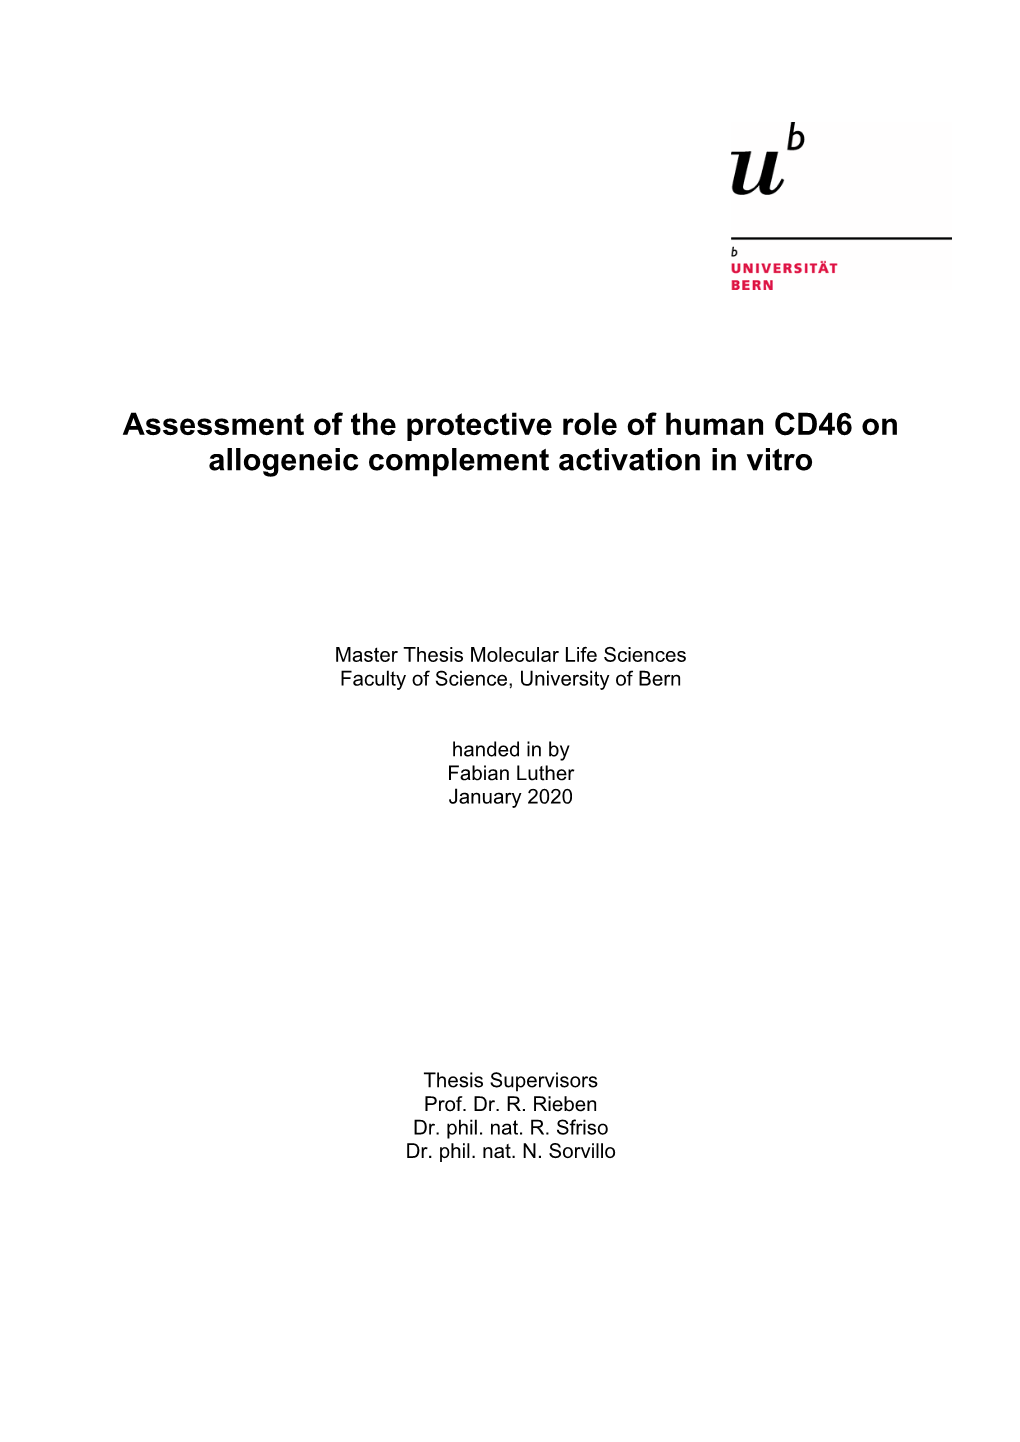 Assessment of the Protective Role of Human CD46 on Allogeneic Complement Activation in Vitro